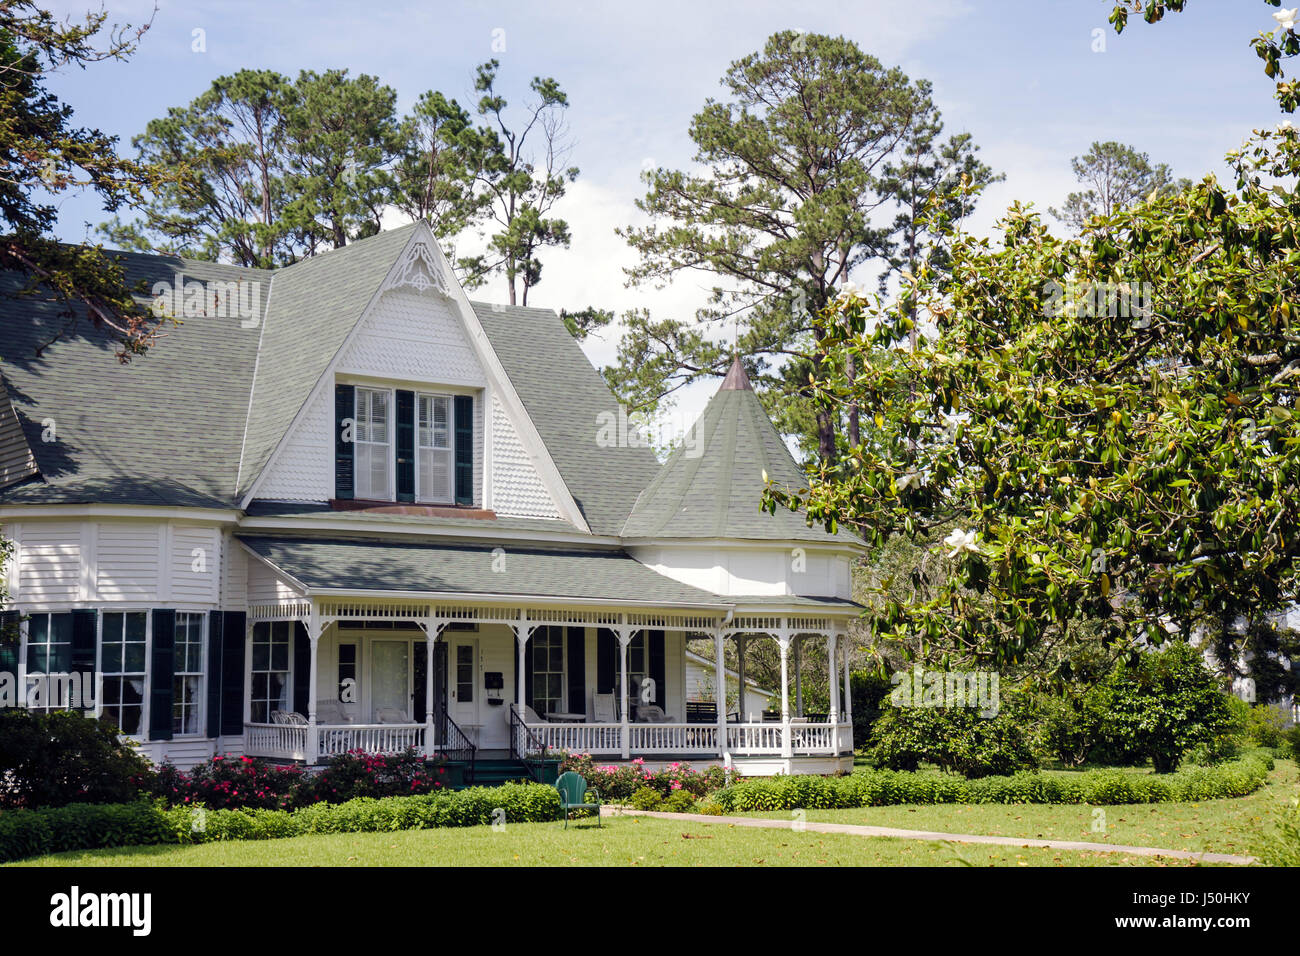 Monroeville Alabama,Pineville Road,historic homes,Stallworth home,Queen Anne style,columns,wrap around porch,turret,gabled roof,front yard,tree,landsc Stock Photo